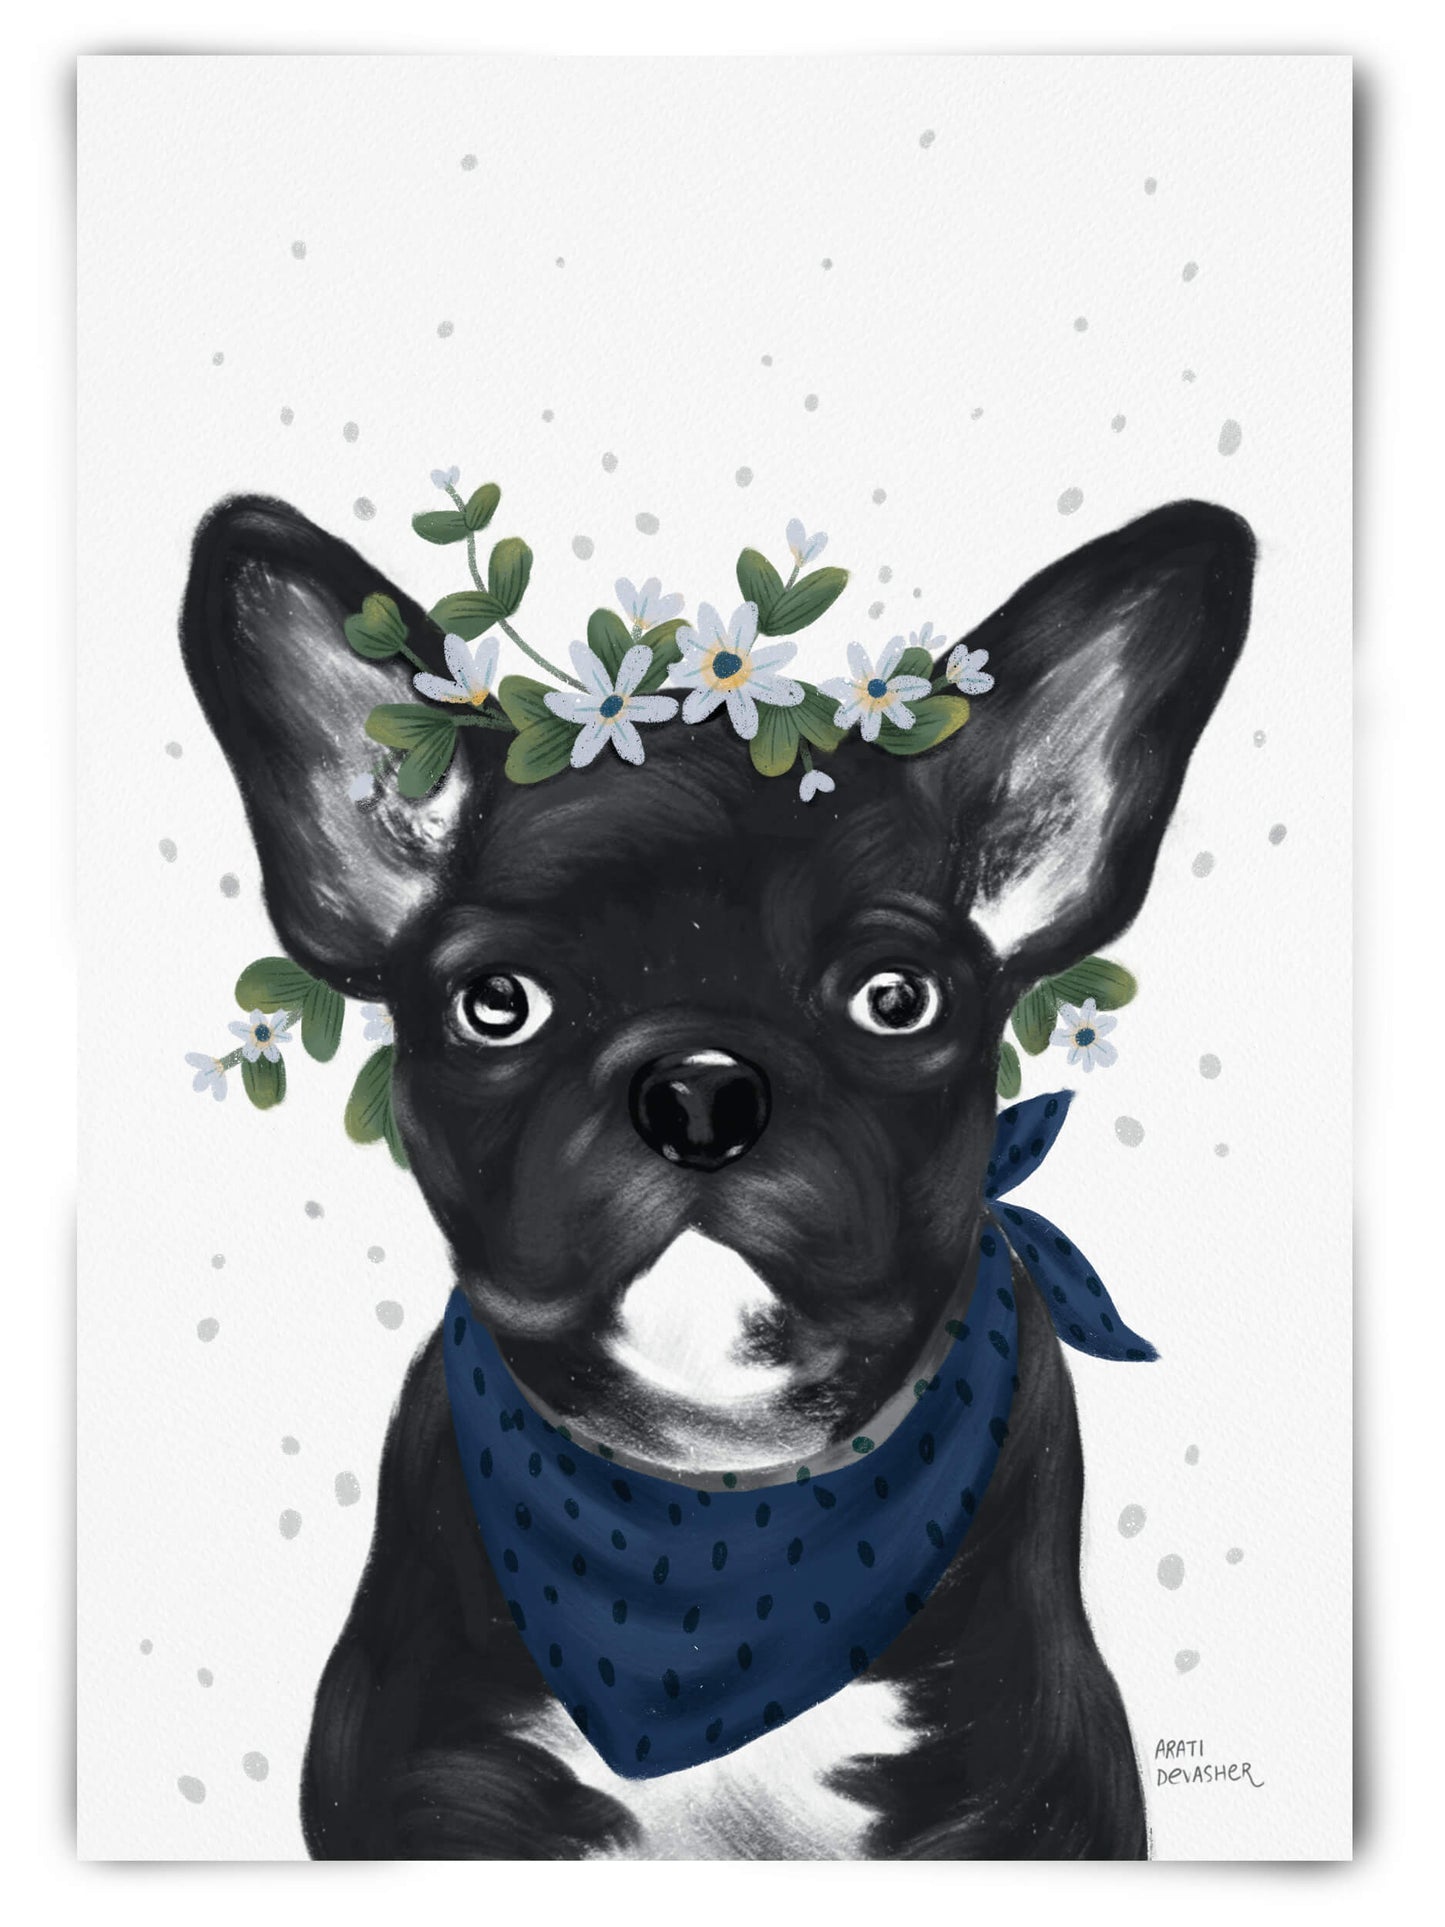 Custom pet portrait with flower crown and metallic details